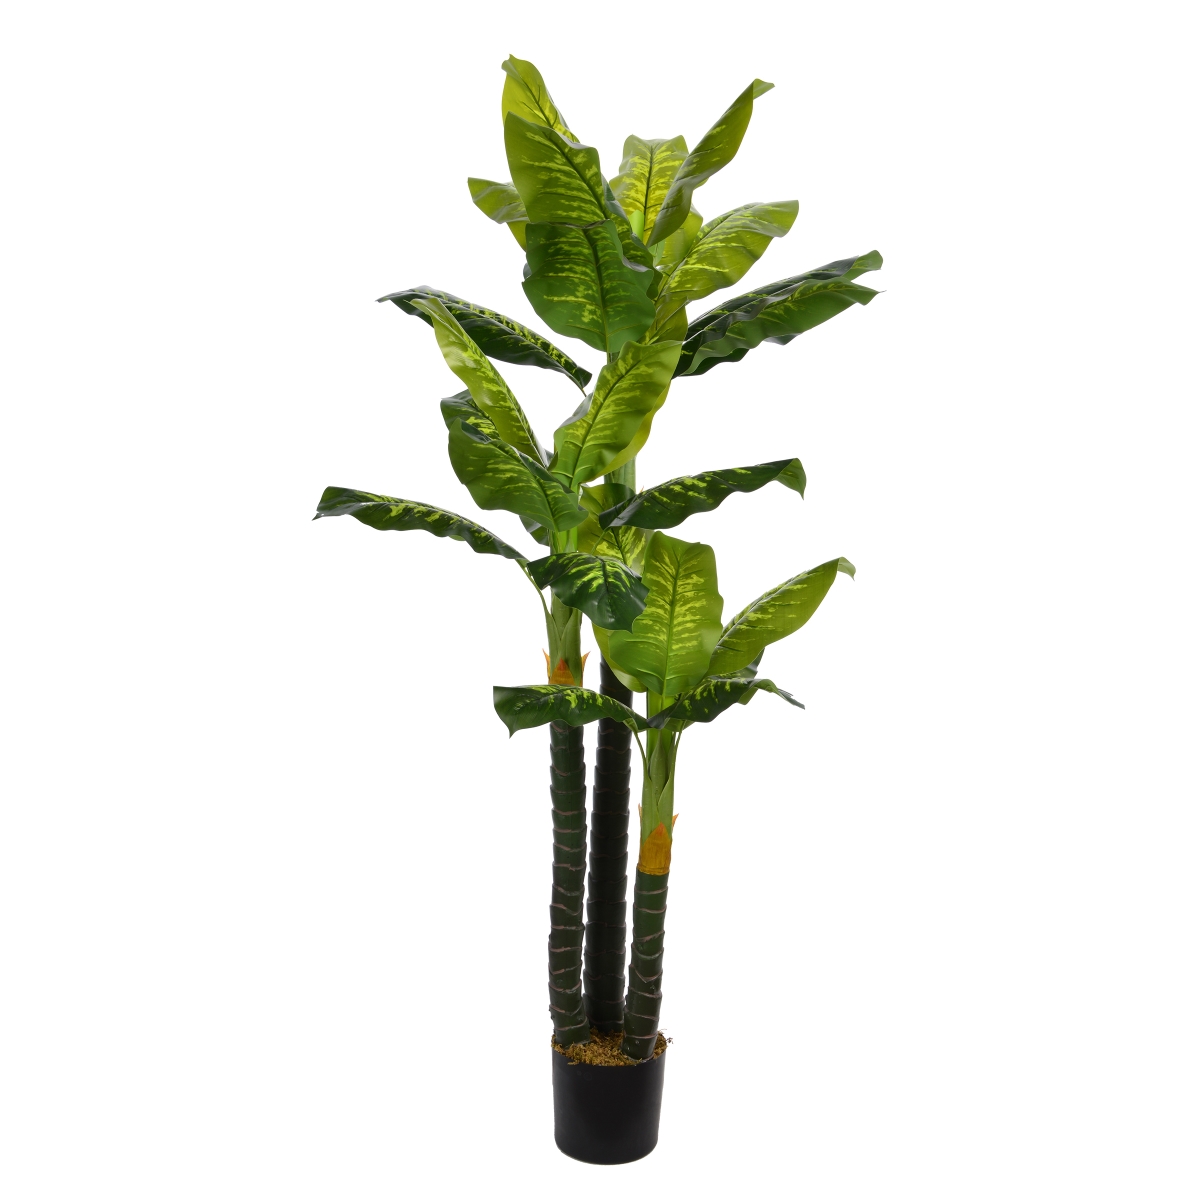 Vhx123 72 In. Tall Evergreen In Pot Real Touch